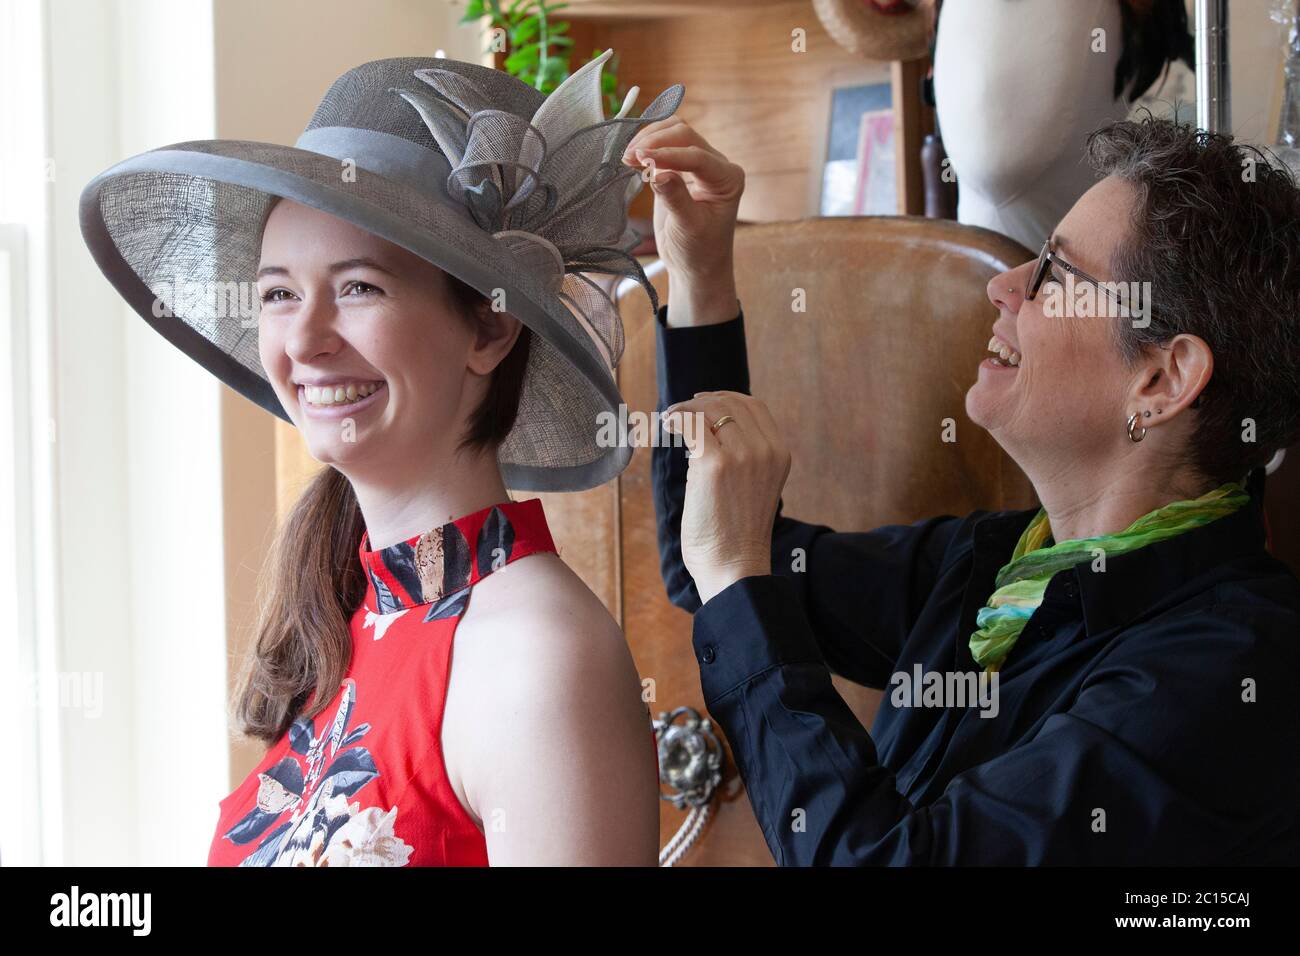 London, UK, 14 June 2020: Milliner Leanne Fredrick prepares one of her hats,  modelled by her daughter Emeline, for the social media fundraiser 'Royal  Ascot at Home' which will run from 16th